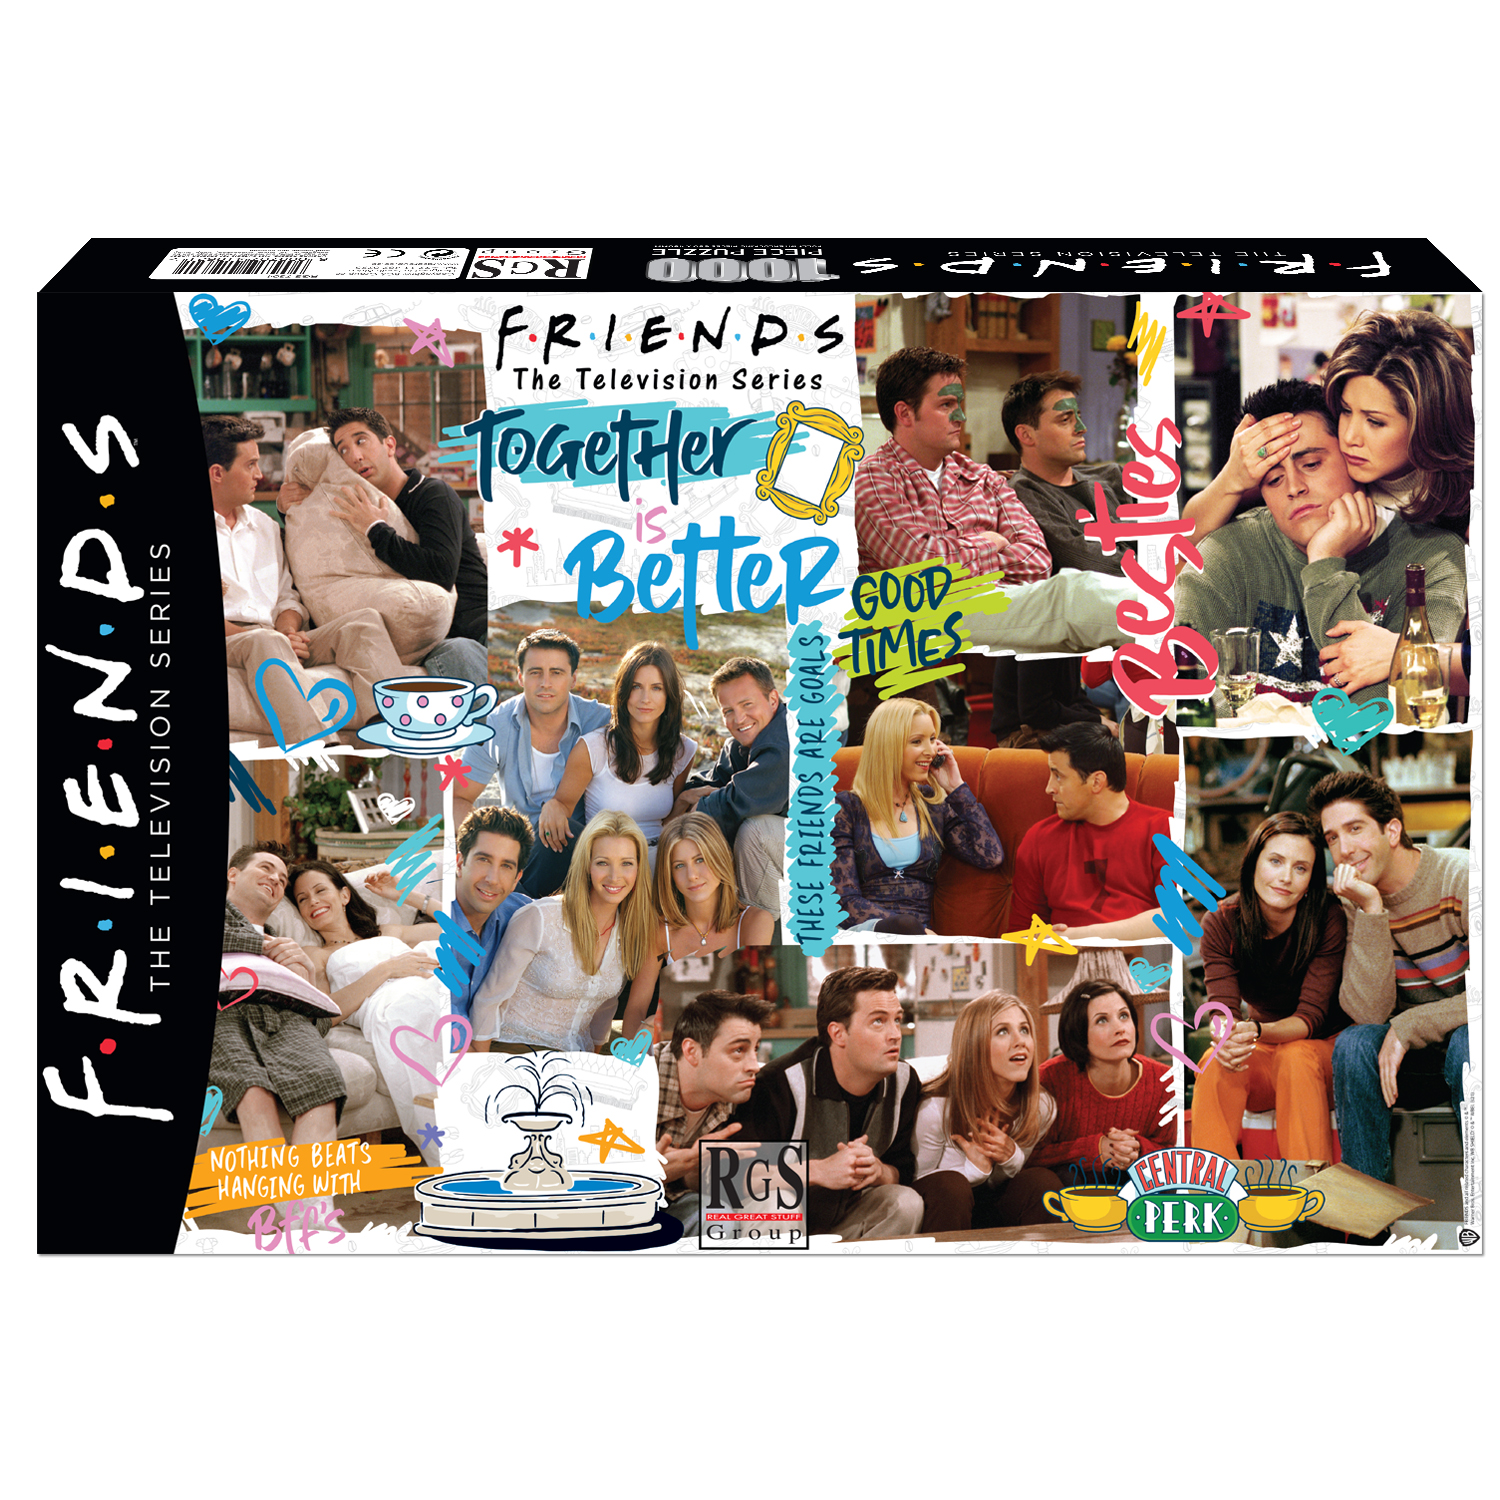 Collage of character images from FRIENDS tv series